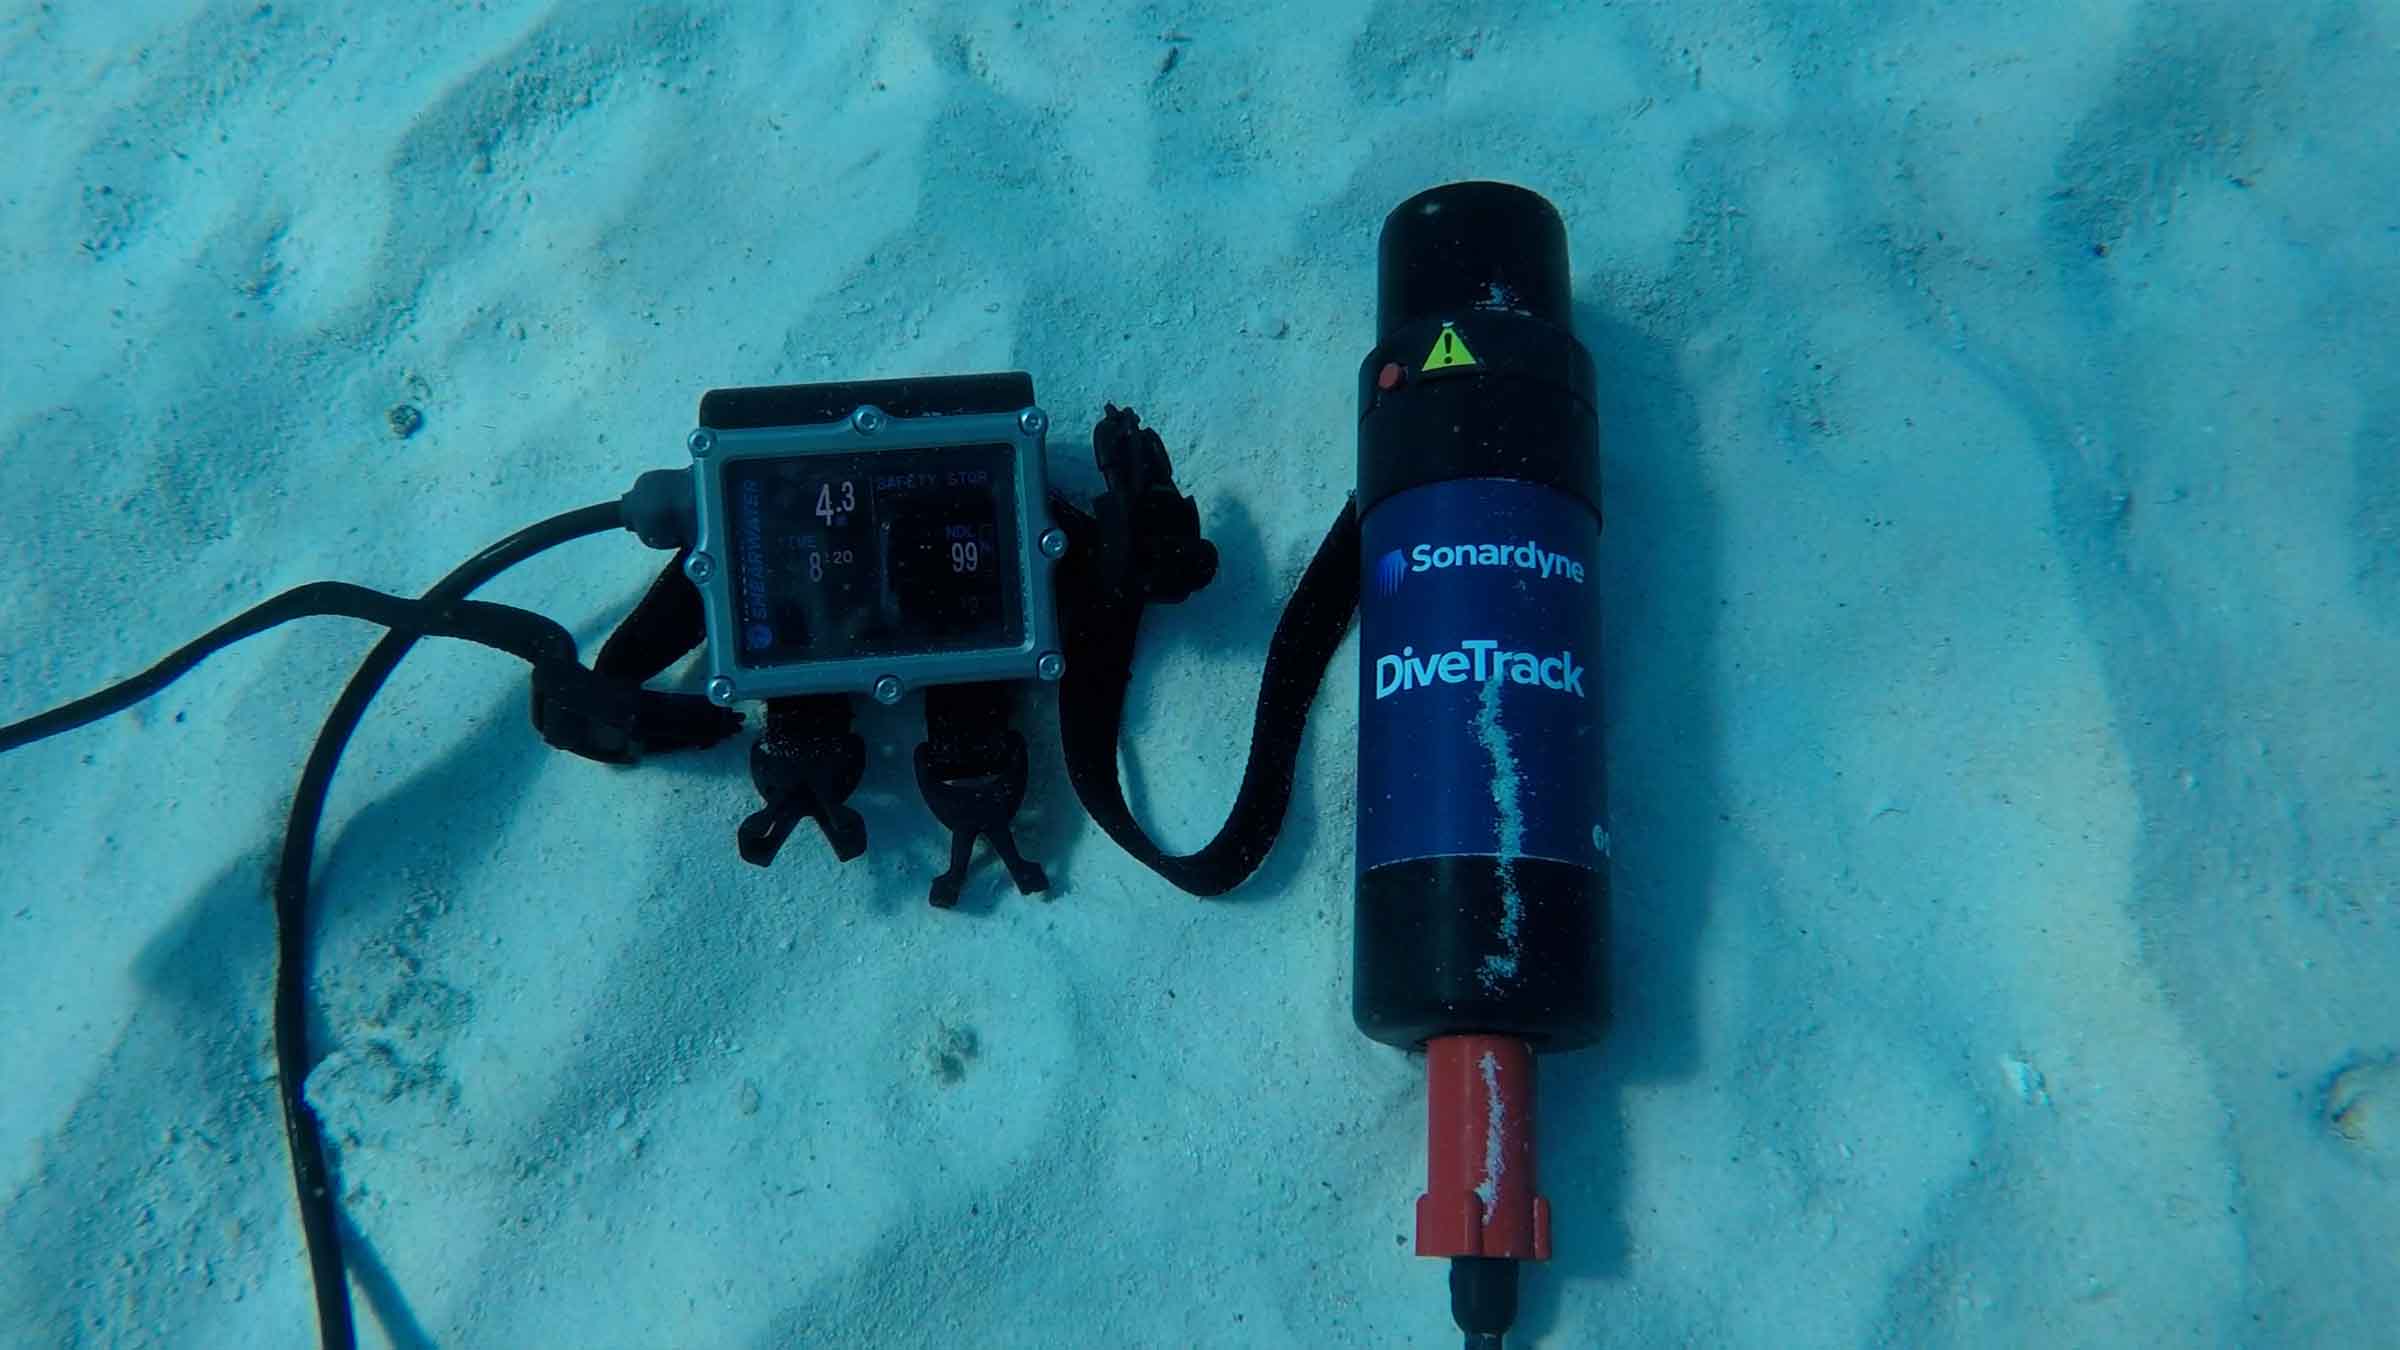 DiveTrack transponder and Shearwater watch on seabed